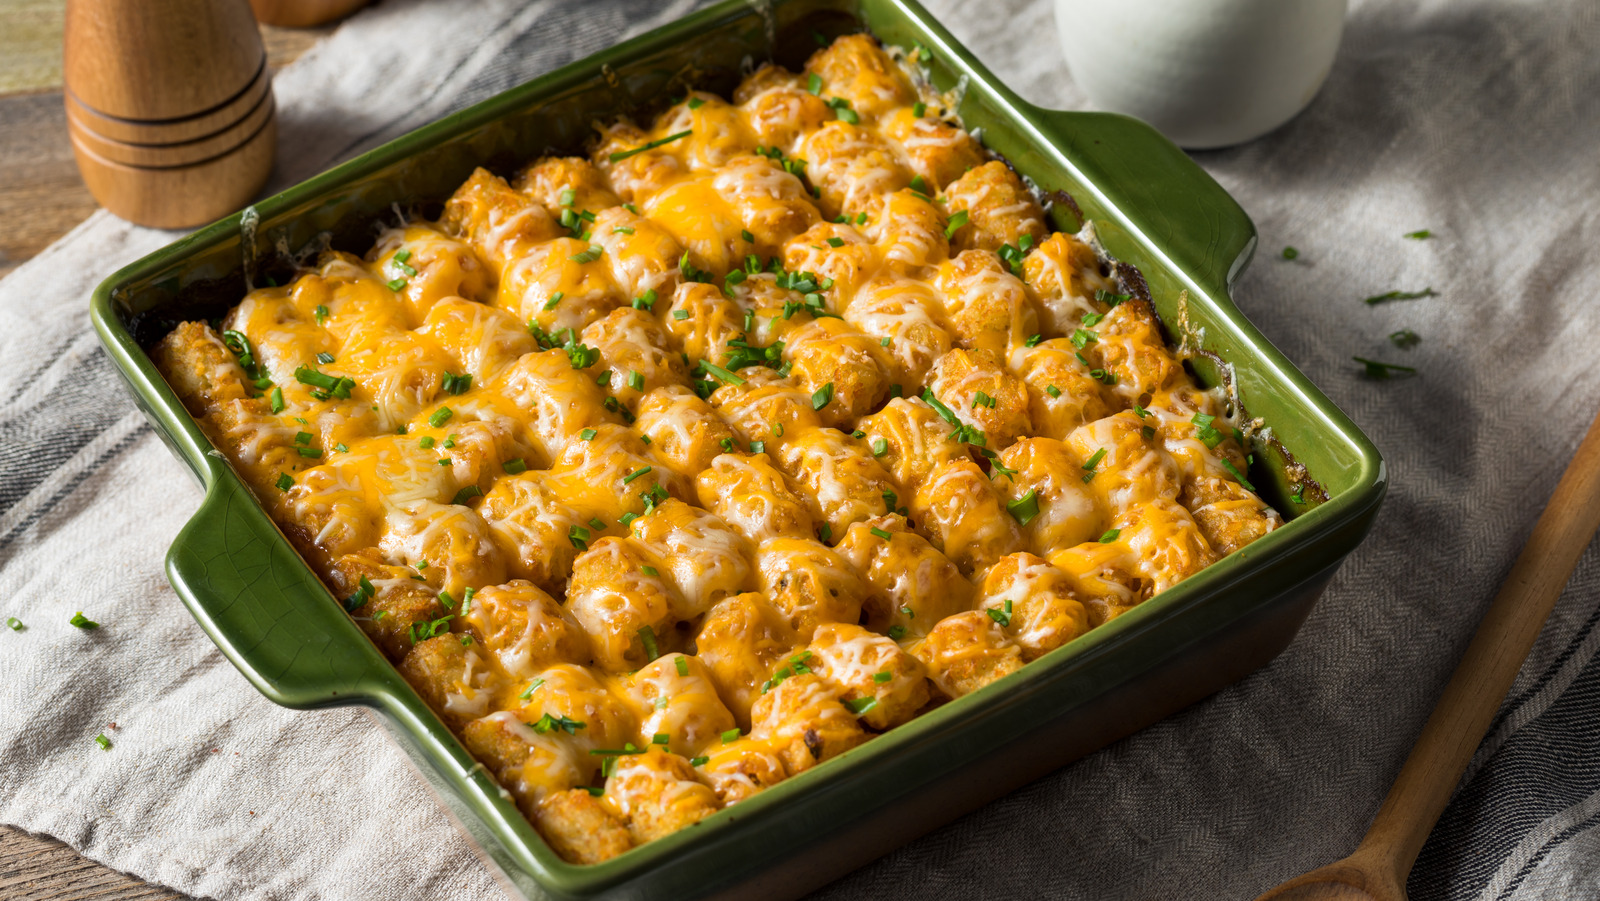 https://www.thedailymeal.com/img/gallery/take-frozen-tater-tots-to-another-level-with-a-cheesy-breakfast-bake/l-intro-1688493024.jpg